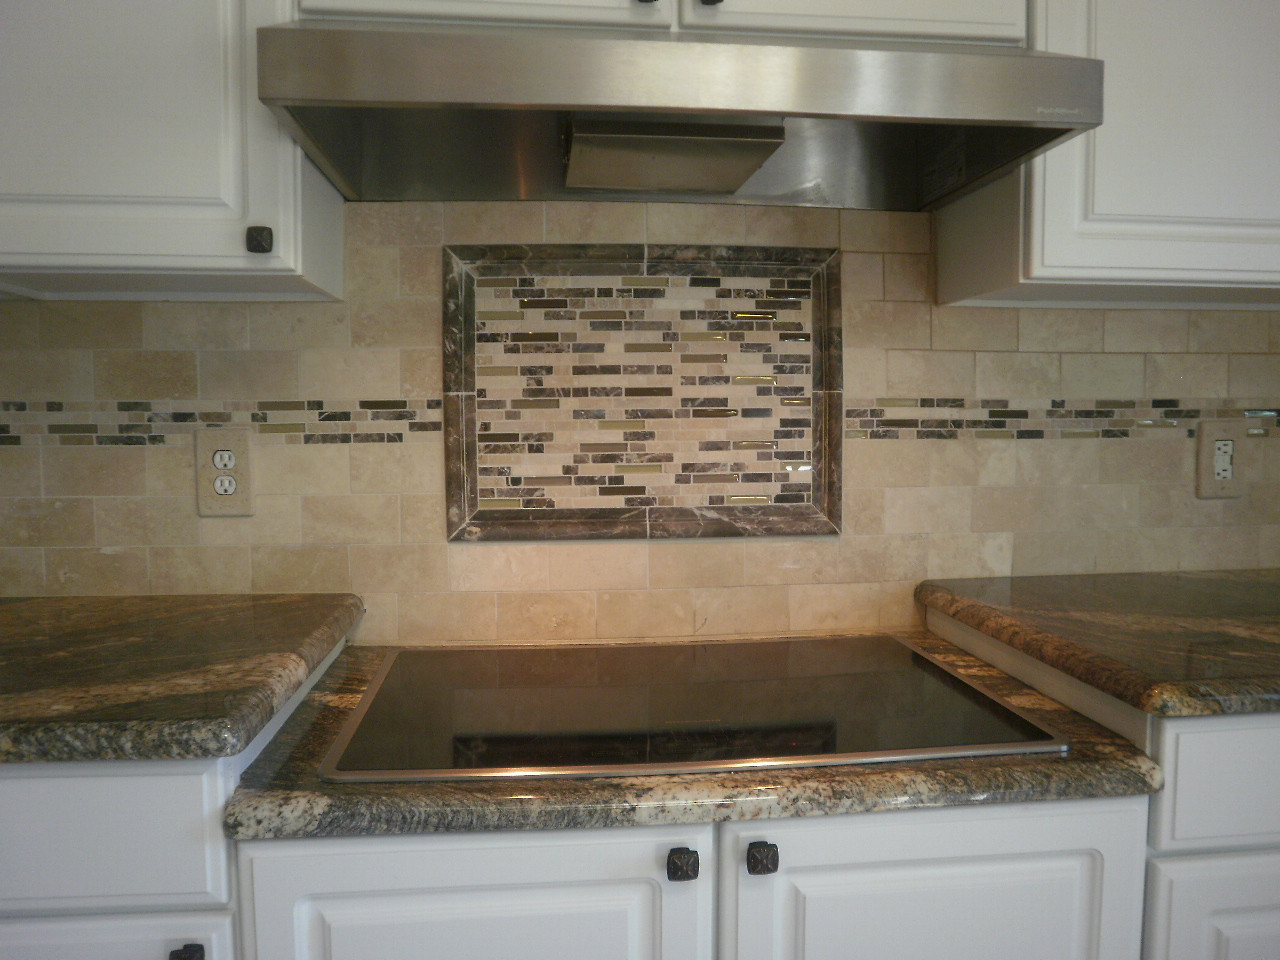 Tile Backsplash Kitchen Ideas
 Integrity Installations A division of Front